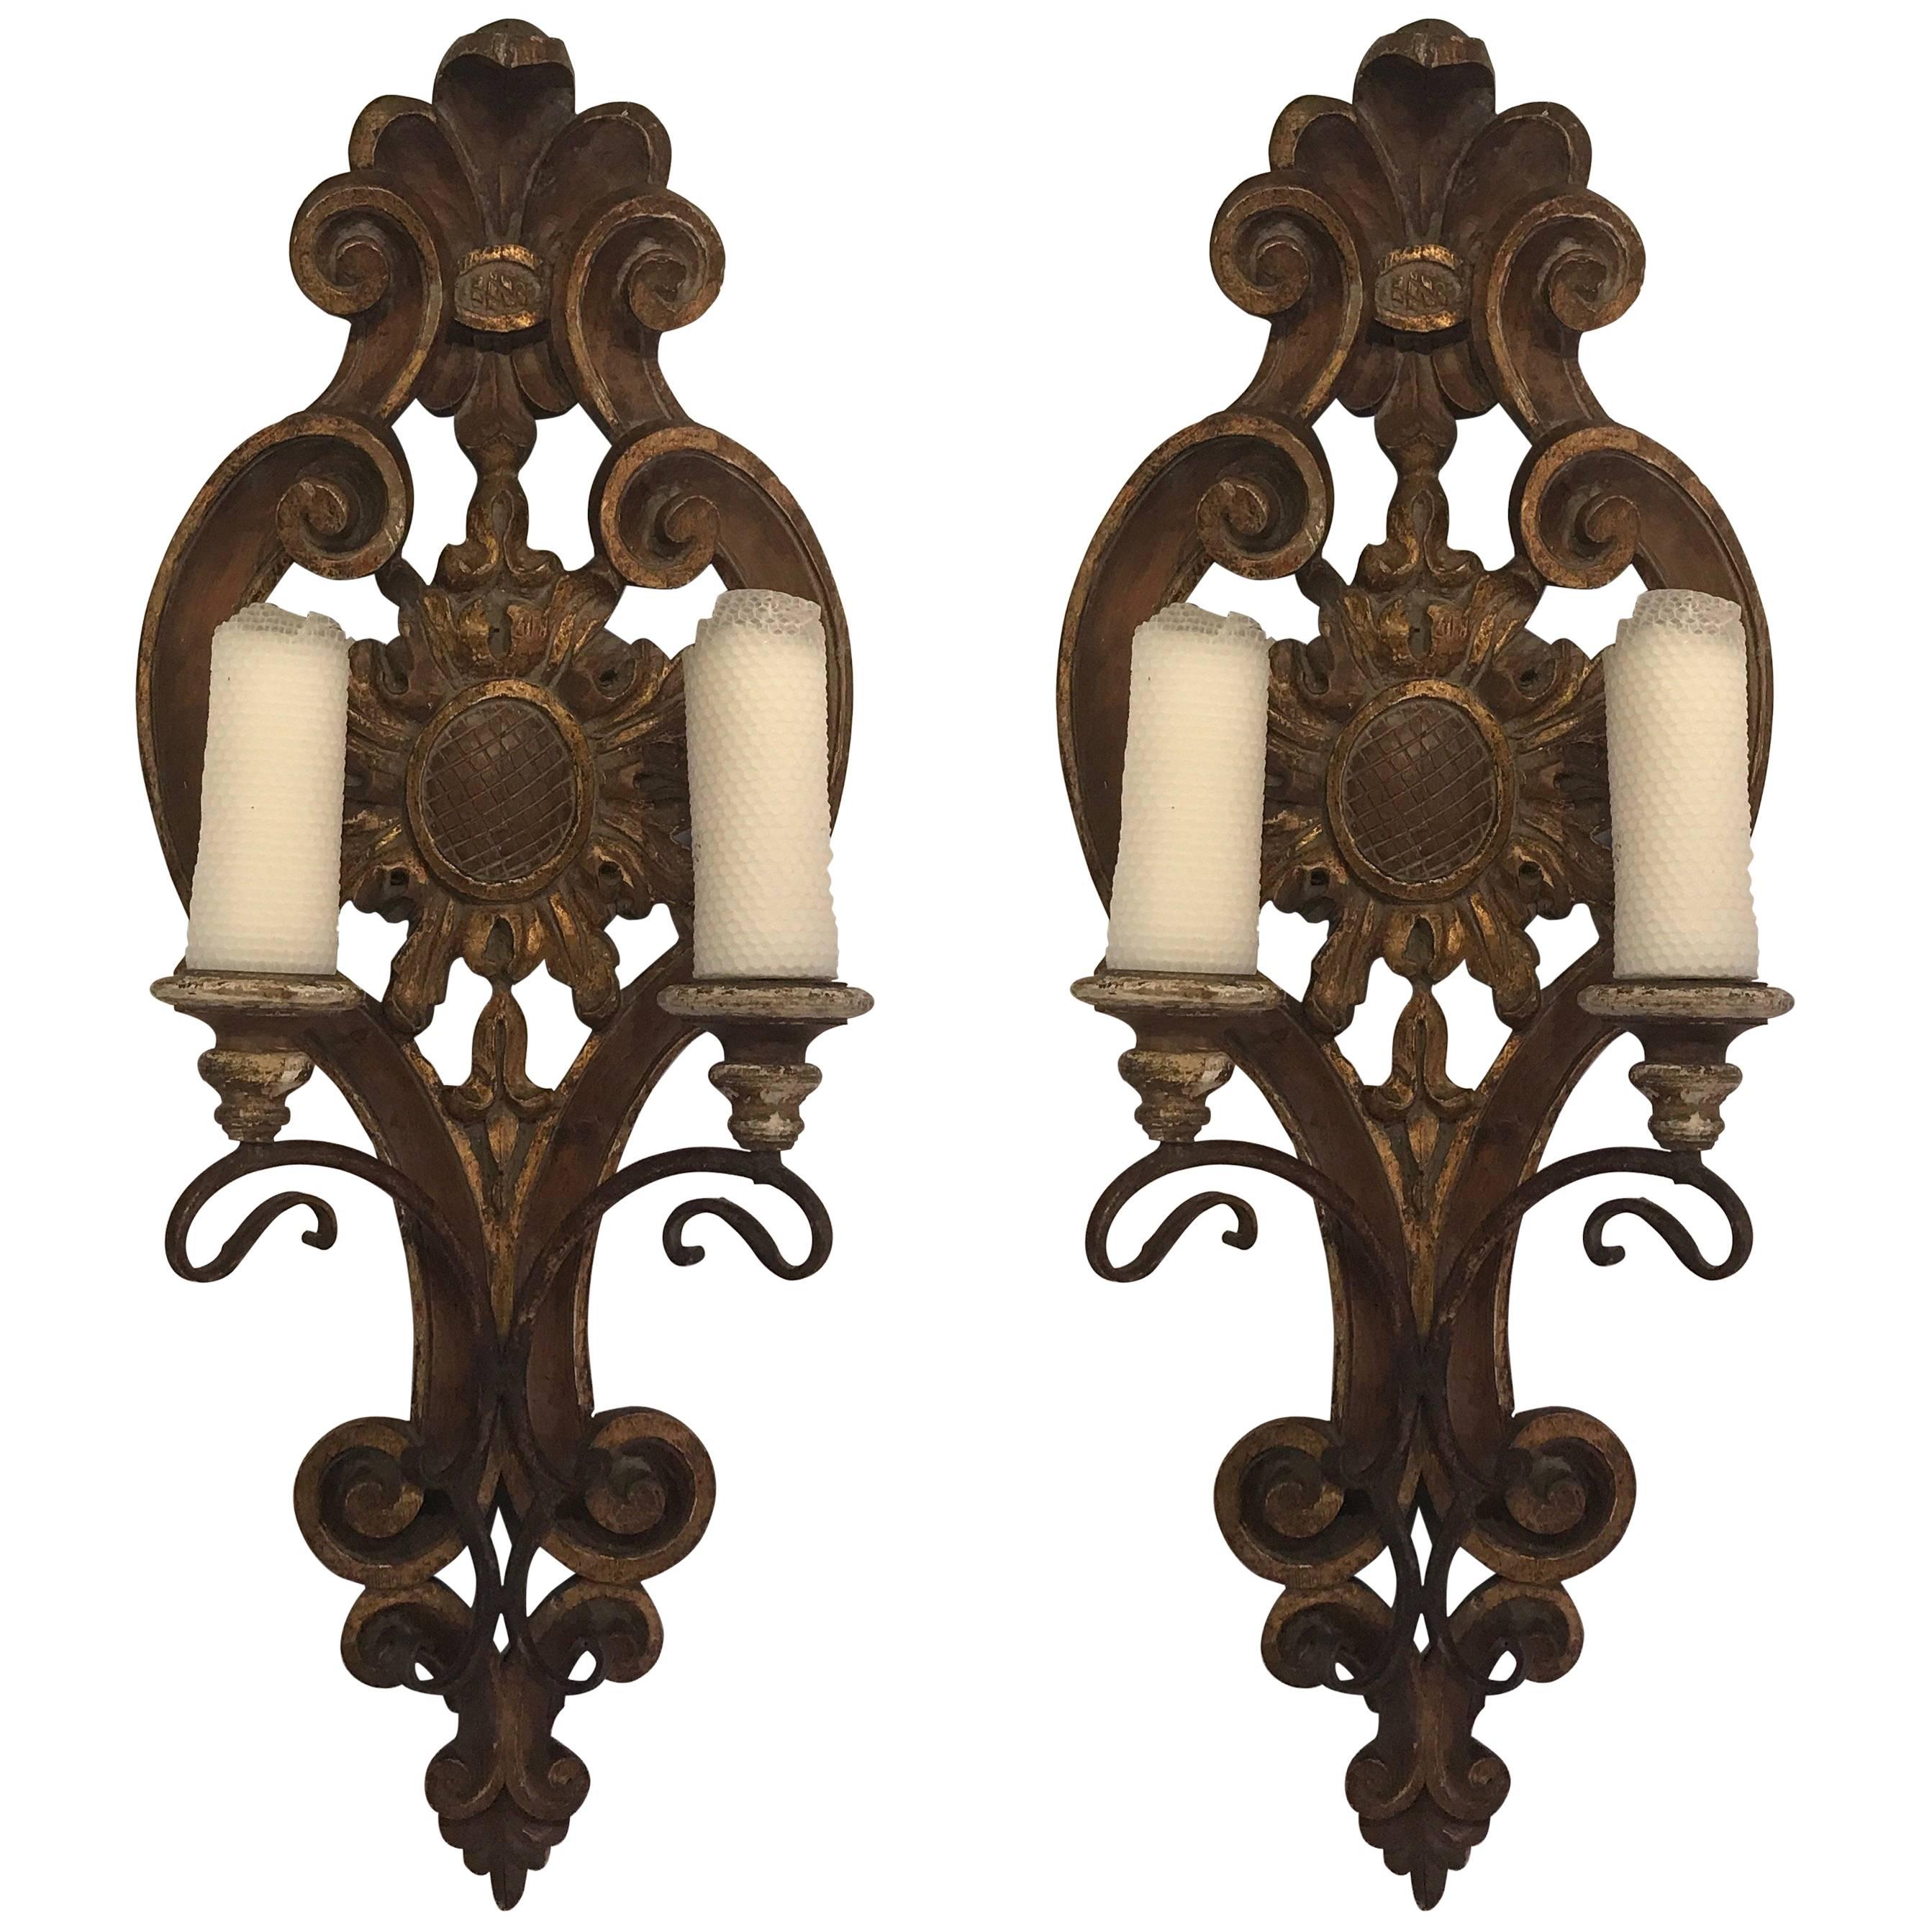 Pair of Hand-Carved Italian Candle Sconces